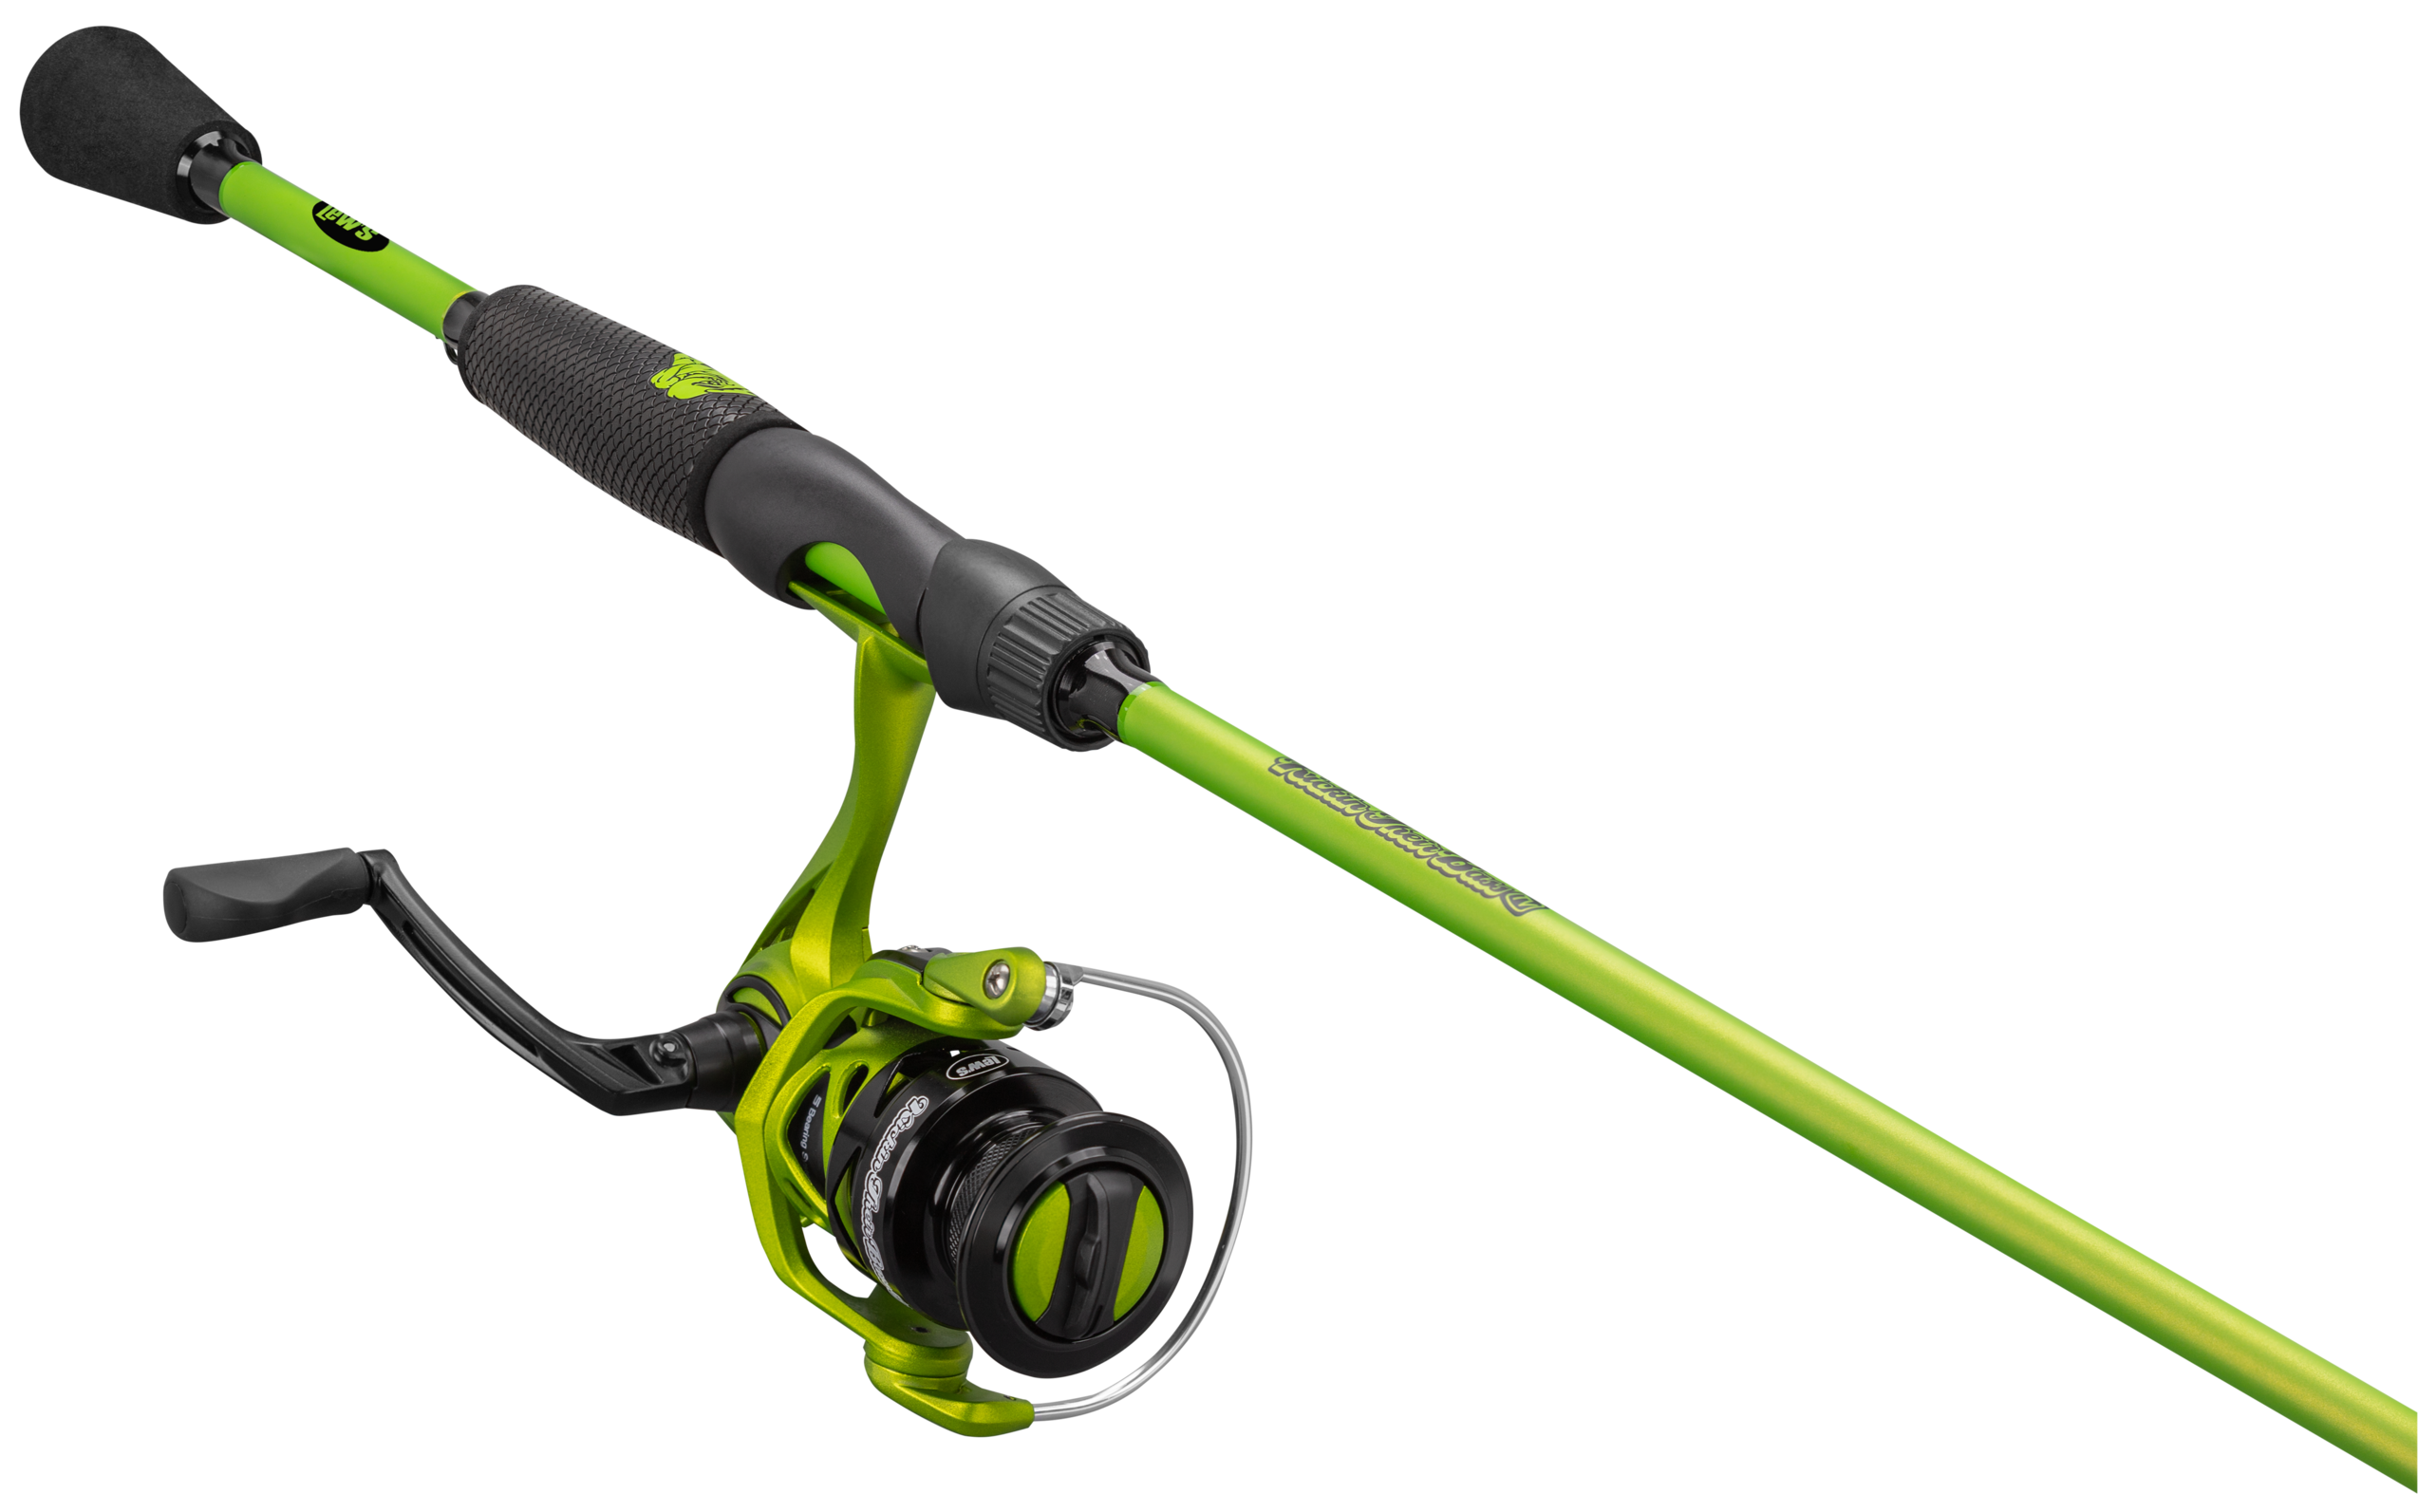 Lew's Mach Crush 30 7' Medium Fast Spinning Rod and Reel Combo